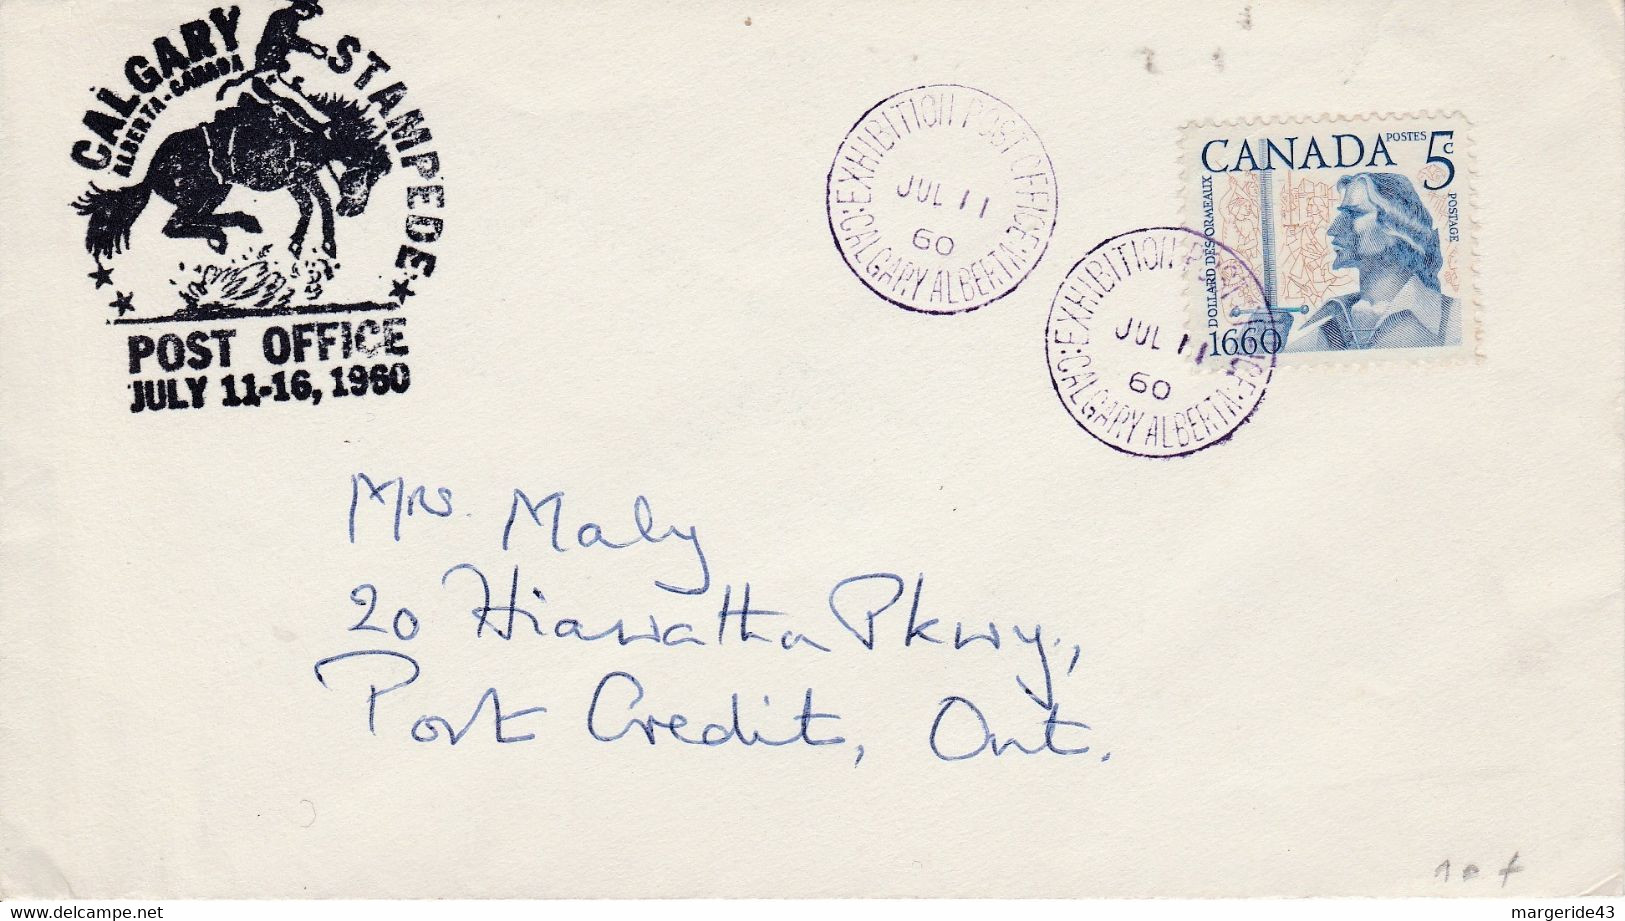 CANADA LETTRE EXHIBITION POST OFFICE CALGARY STAMPEDE 1960 - Enveloppes Commémoratives